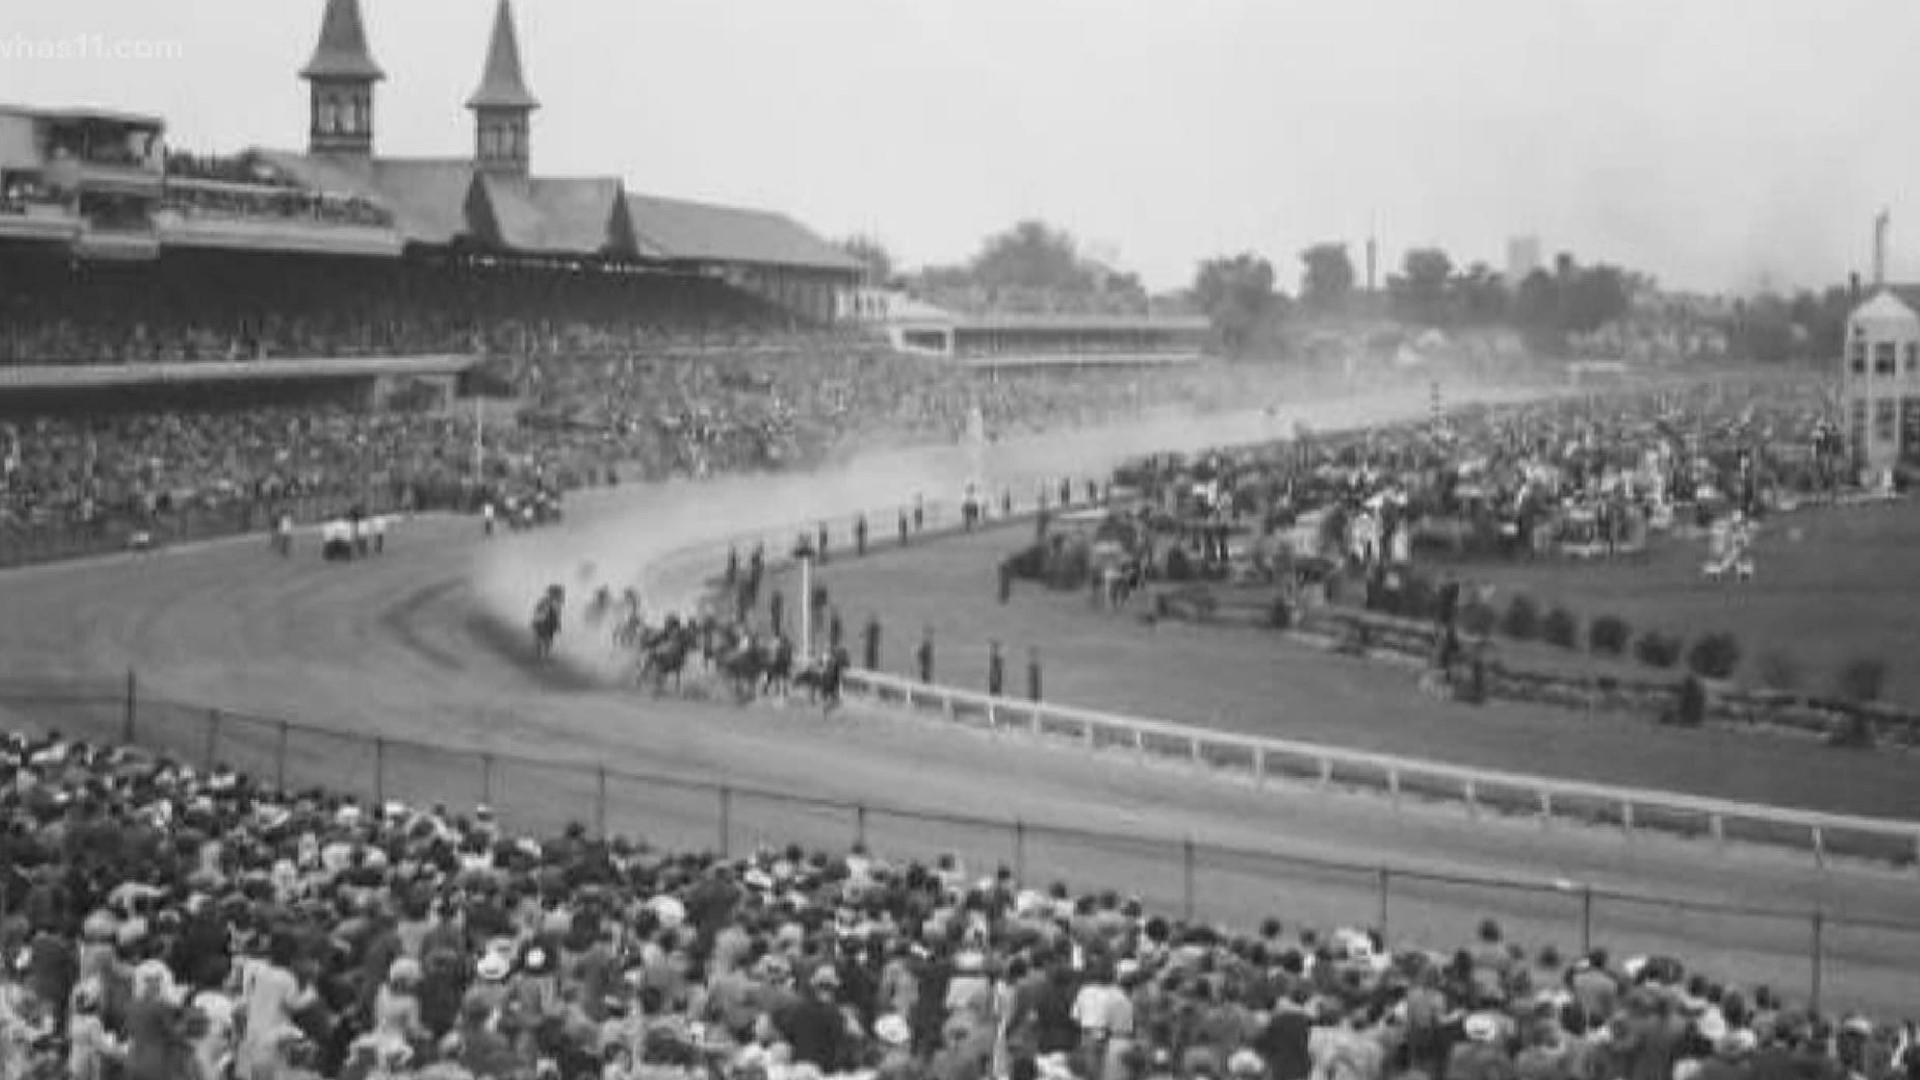 The trail of history is one of beating the odds for the world's most famous horse race. The Kentucky Derby has never been canceled.